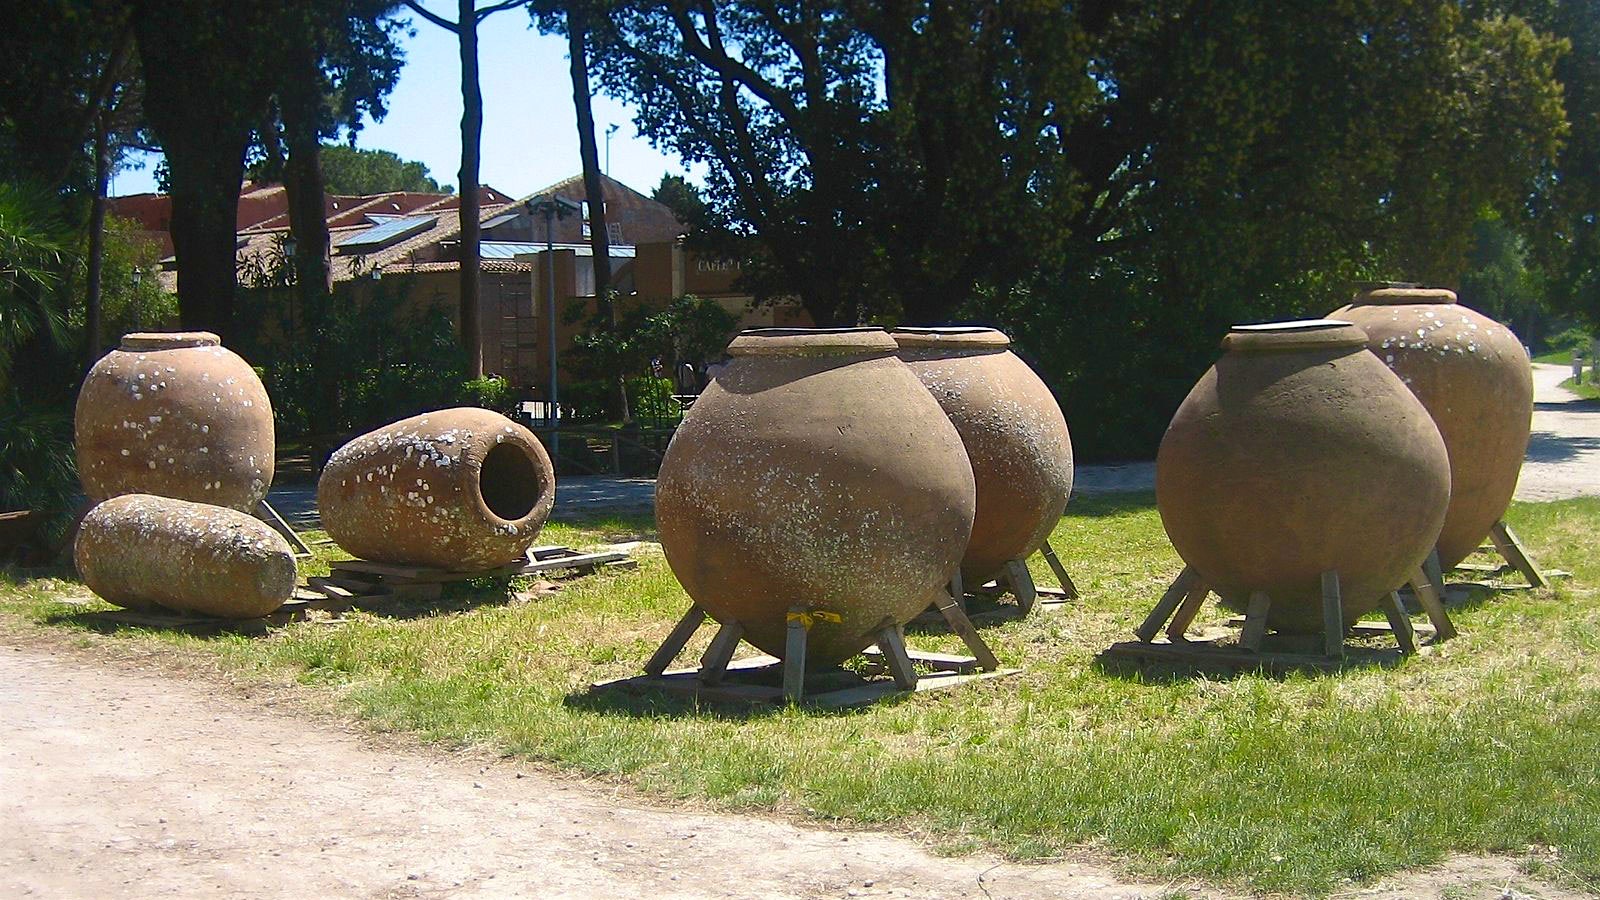  Large clay  vessels, called dolia, found in the ancient Roman city of Ostia Antica.